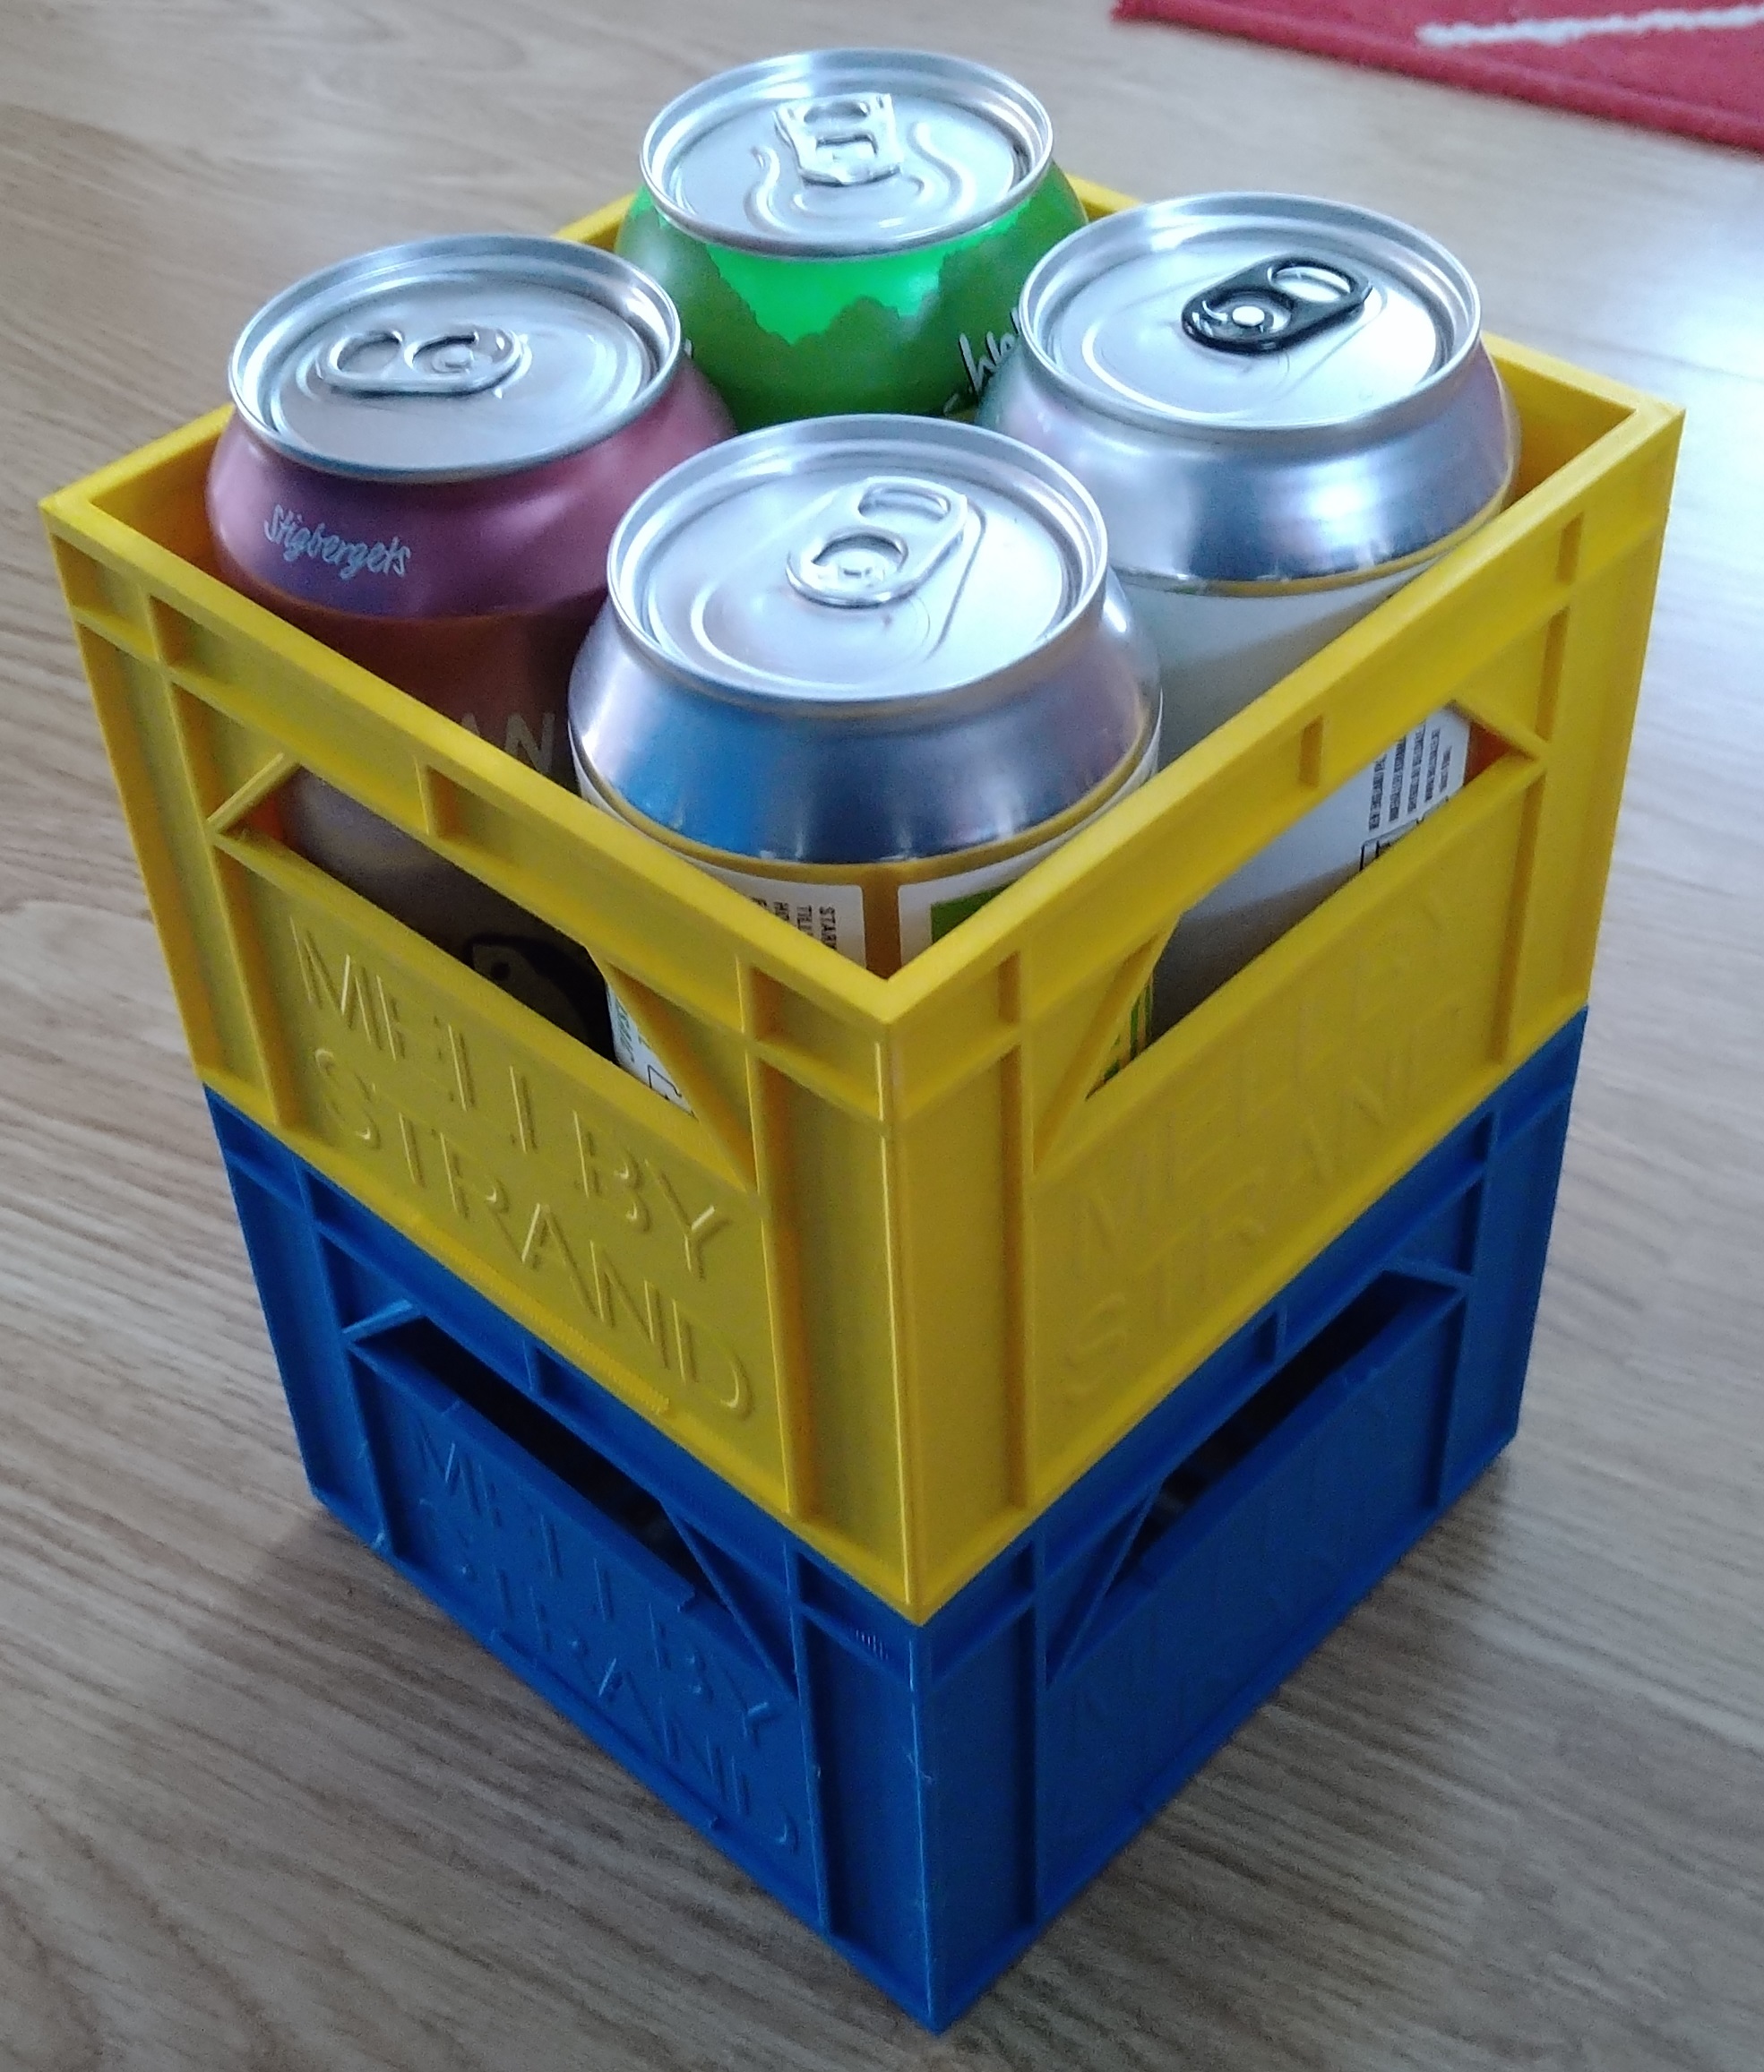 Crate for cans